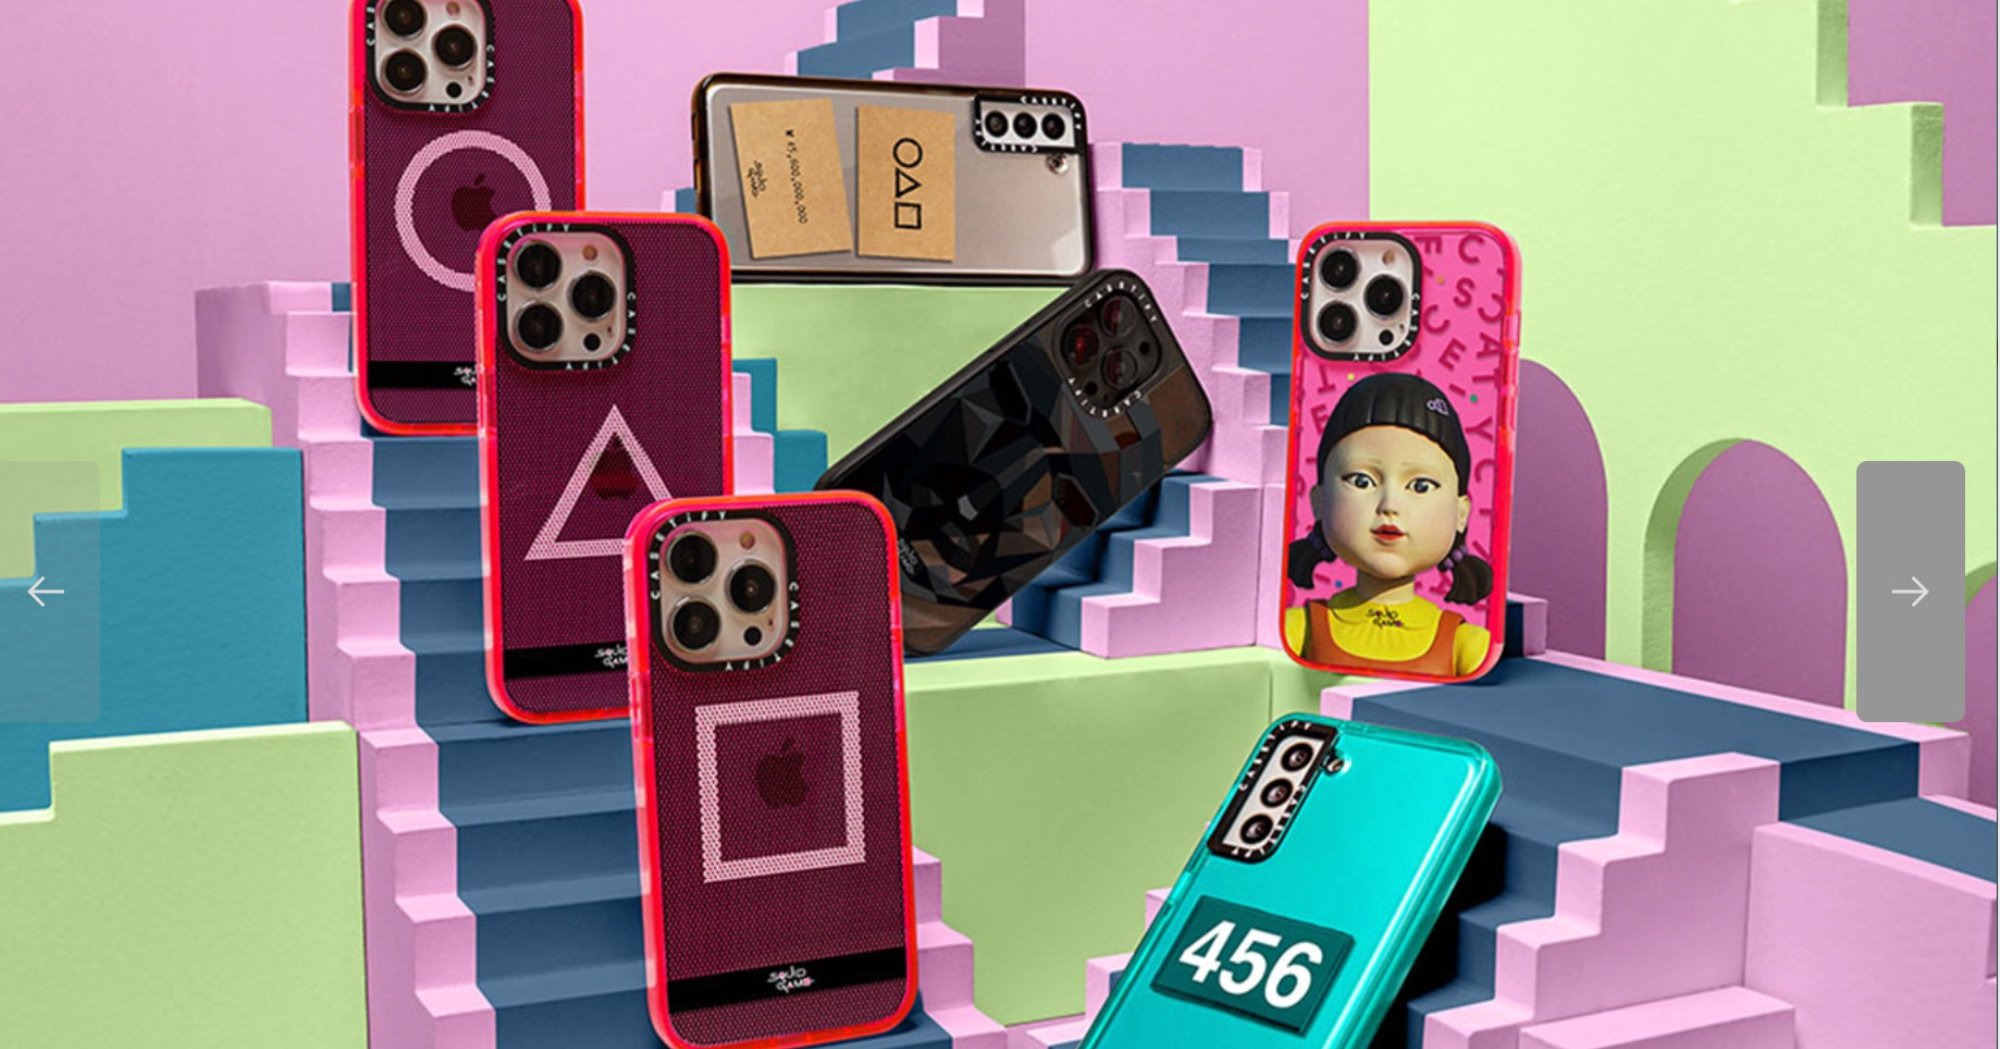 'Squid Game' gift guide with K-drama phone cases on replica set.